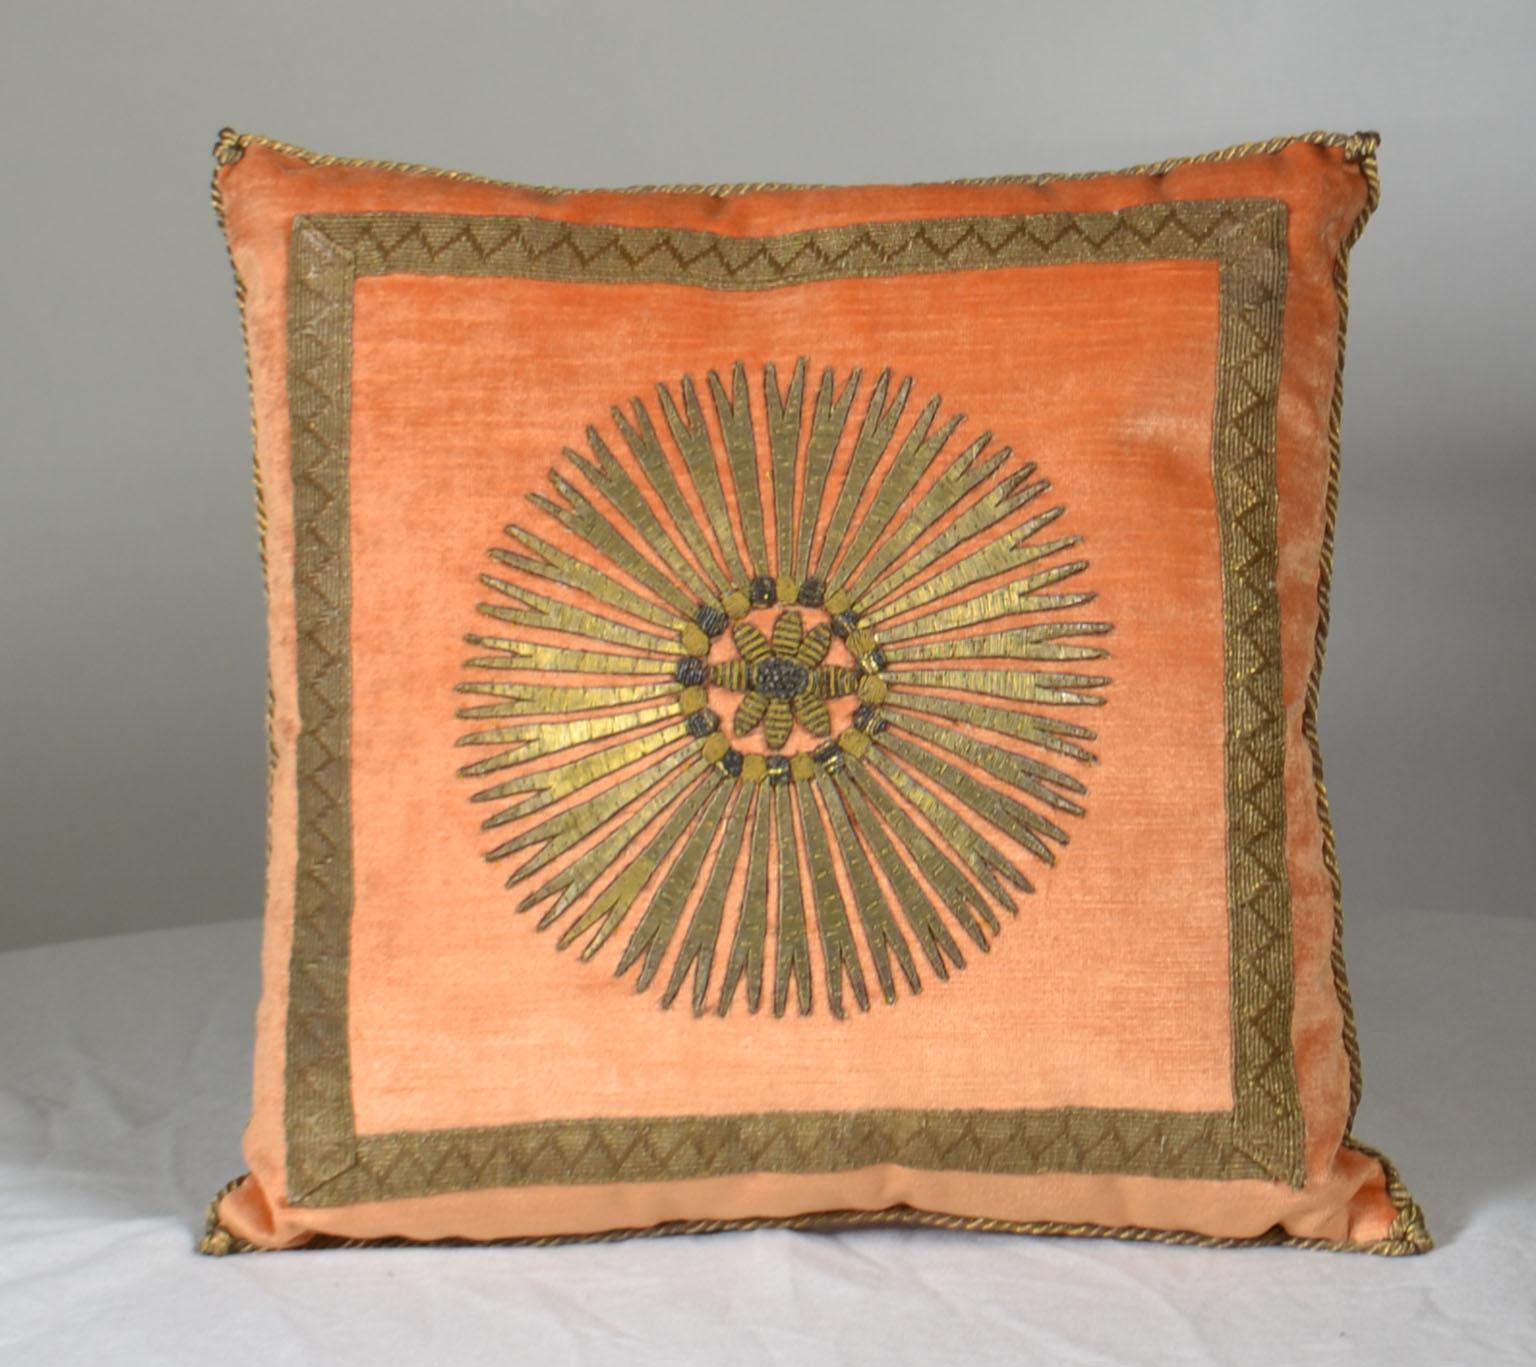 Antique ottoman empire raised gold metallic embroidery depicting a star burst framed with antique gold gallon on melon velvet, hand trimmed with vintage gold metallic cording knotted in the corners. Measures: 15